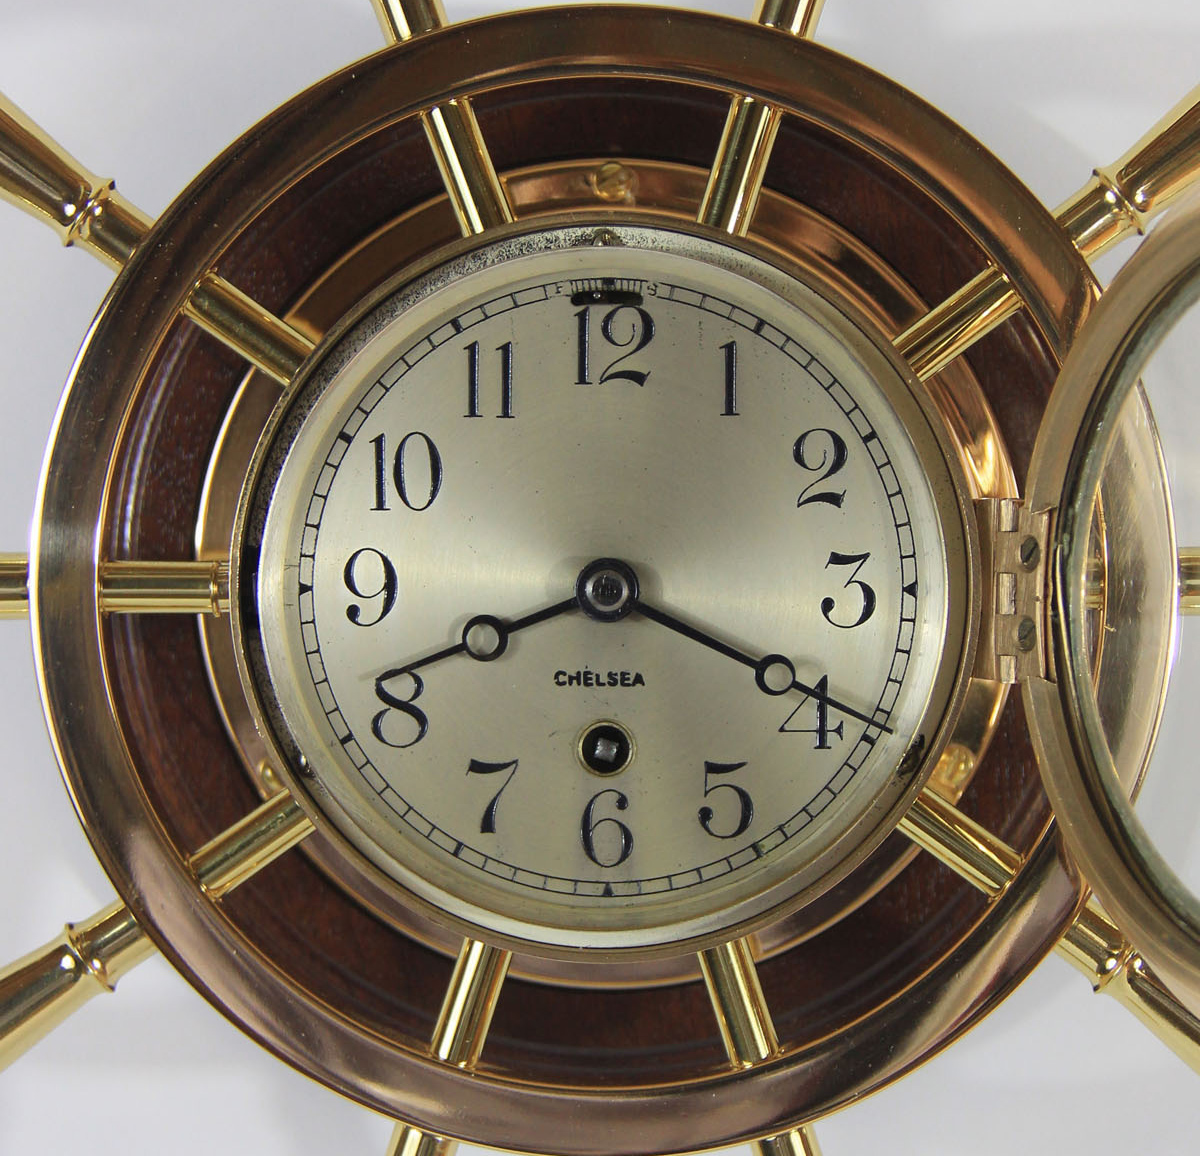 Chelsea 4 1/2 inch Time Only Pilot Yacht Wheel Clock